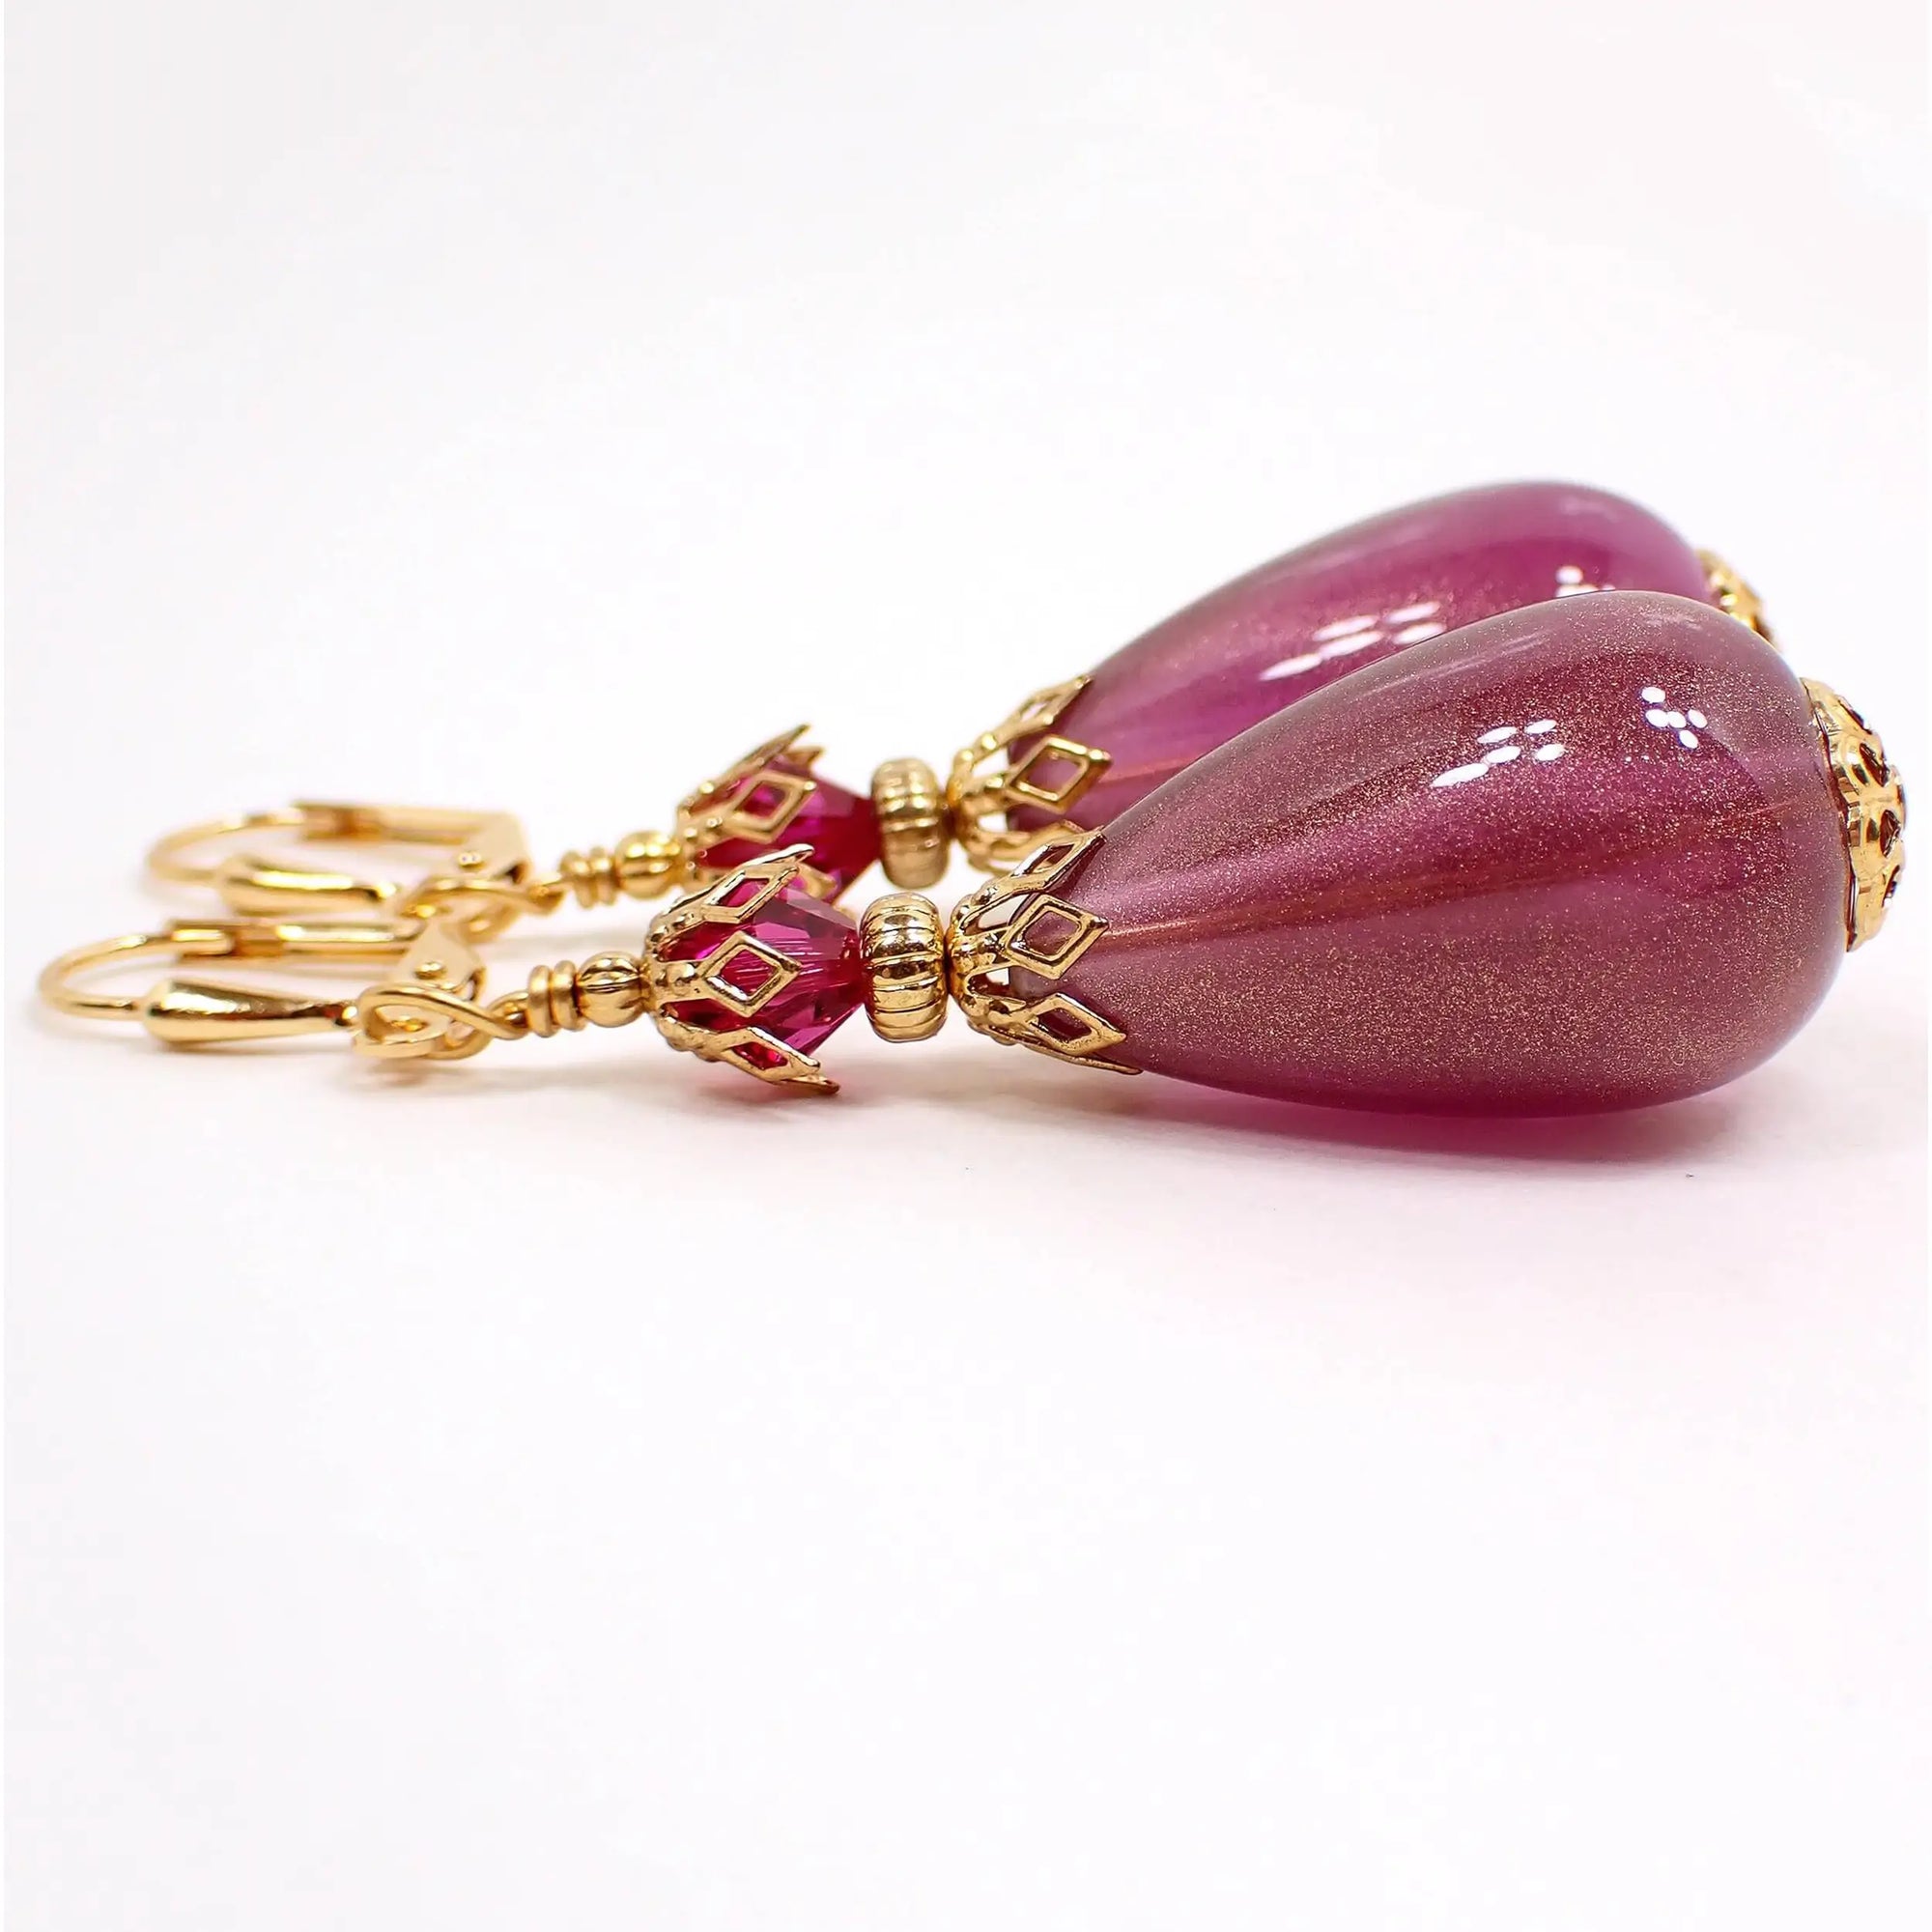 Side view of the large teardrop handmade earrings with vintage lucite beads. The metal is gold plated in color. There are faceted glass crystal beads at the top in a bright fuchsia purple color. The bottom lucite teardrop beads are purple with a metallic gold sheen.